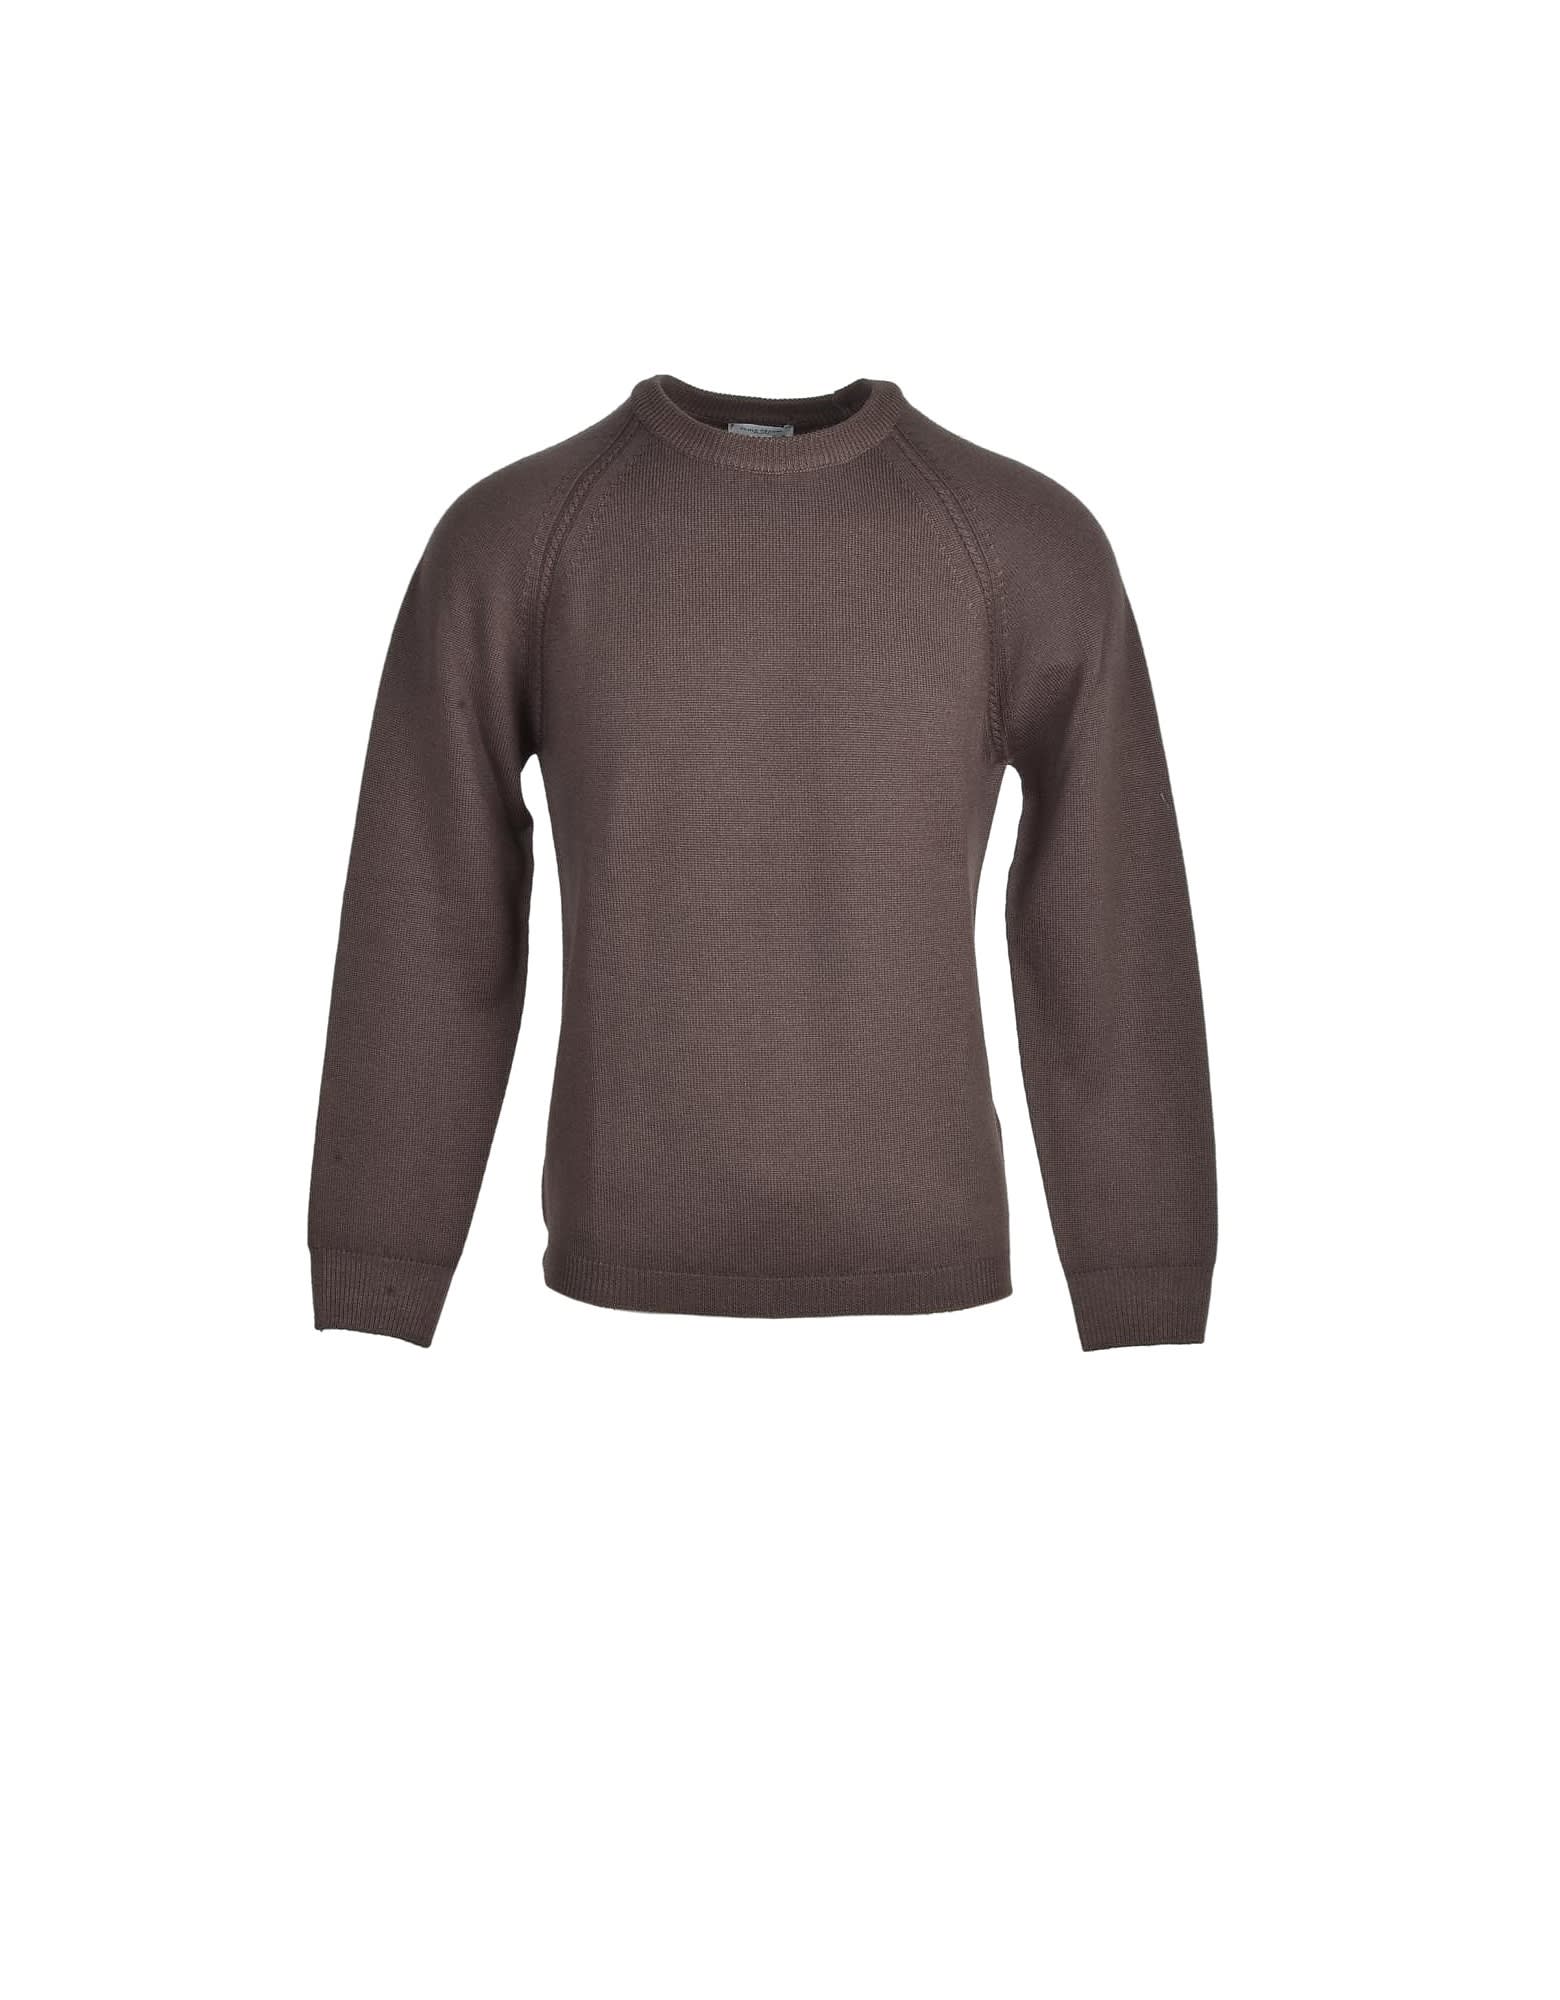 Paolo Pecora Mens Brown Sweater